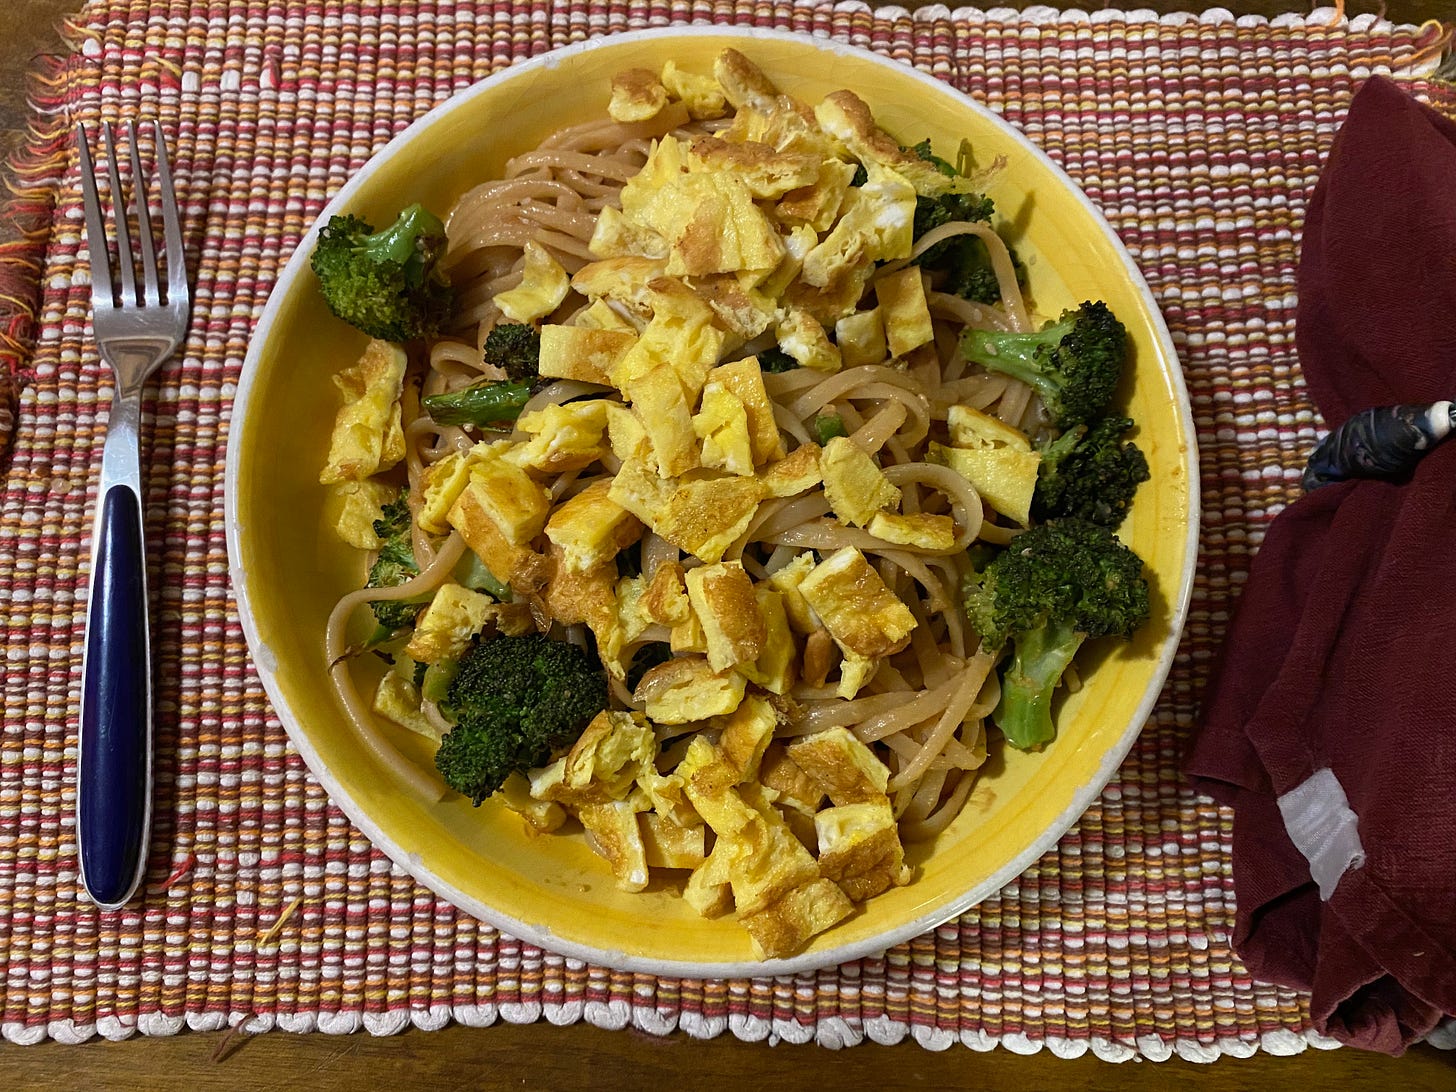 A wide yellow bowl sits on a woven placemat, a fork on one side and a red folded napkin on the other. The bowl is full of noodles, topped with roasted broccoli and small squares of cut-up omelette.